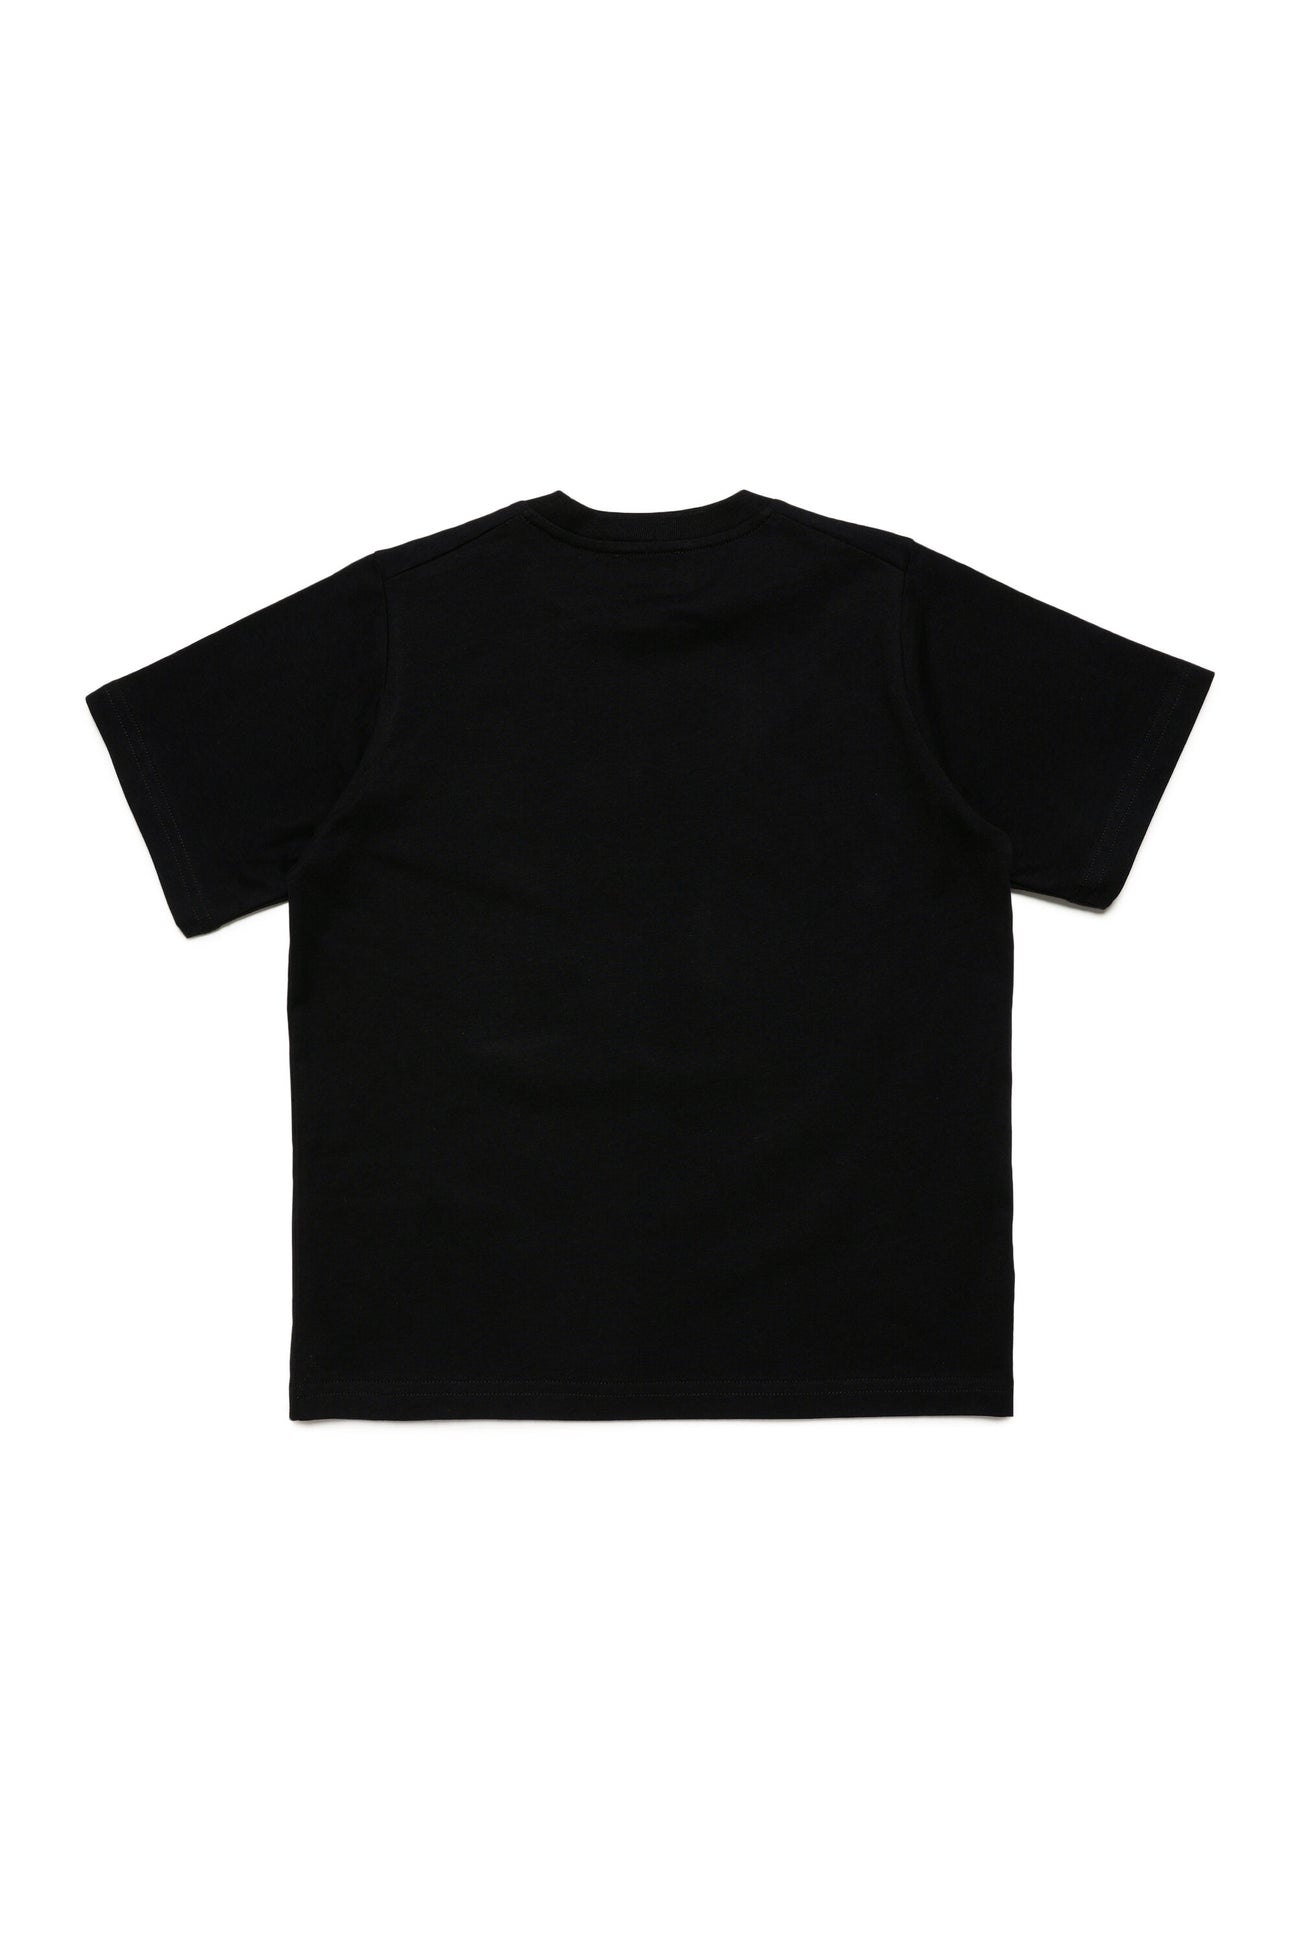 Crew-neck jersey t-shirt with mirrored logo Crew-neck jersey t-shirt with mirrored logo